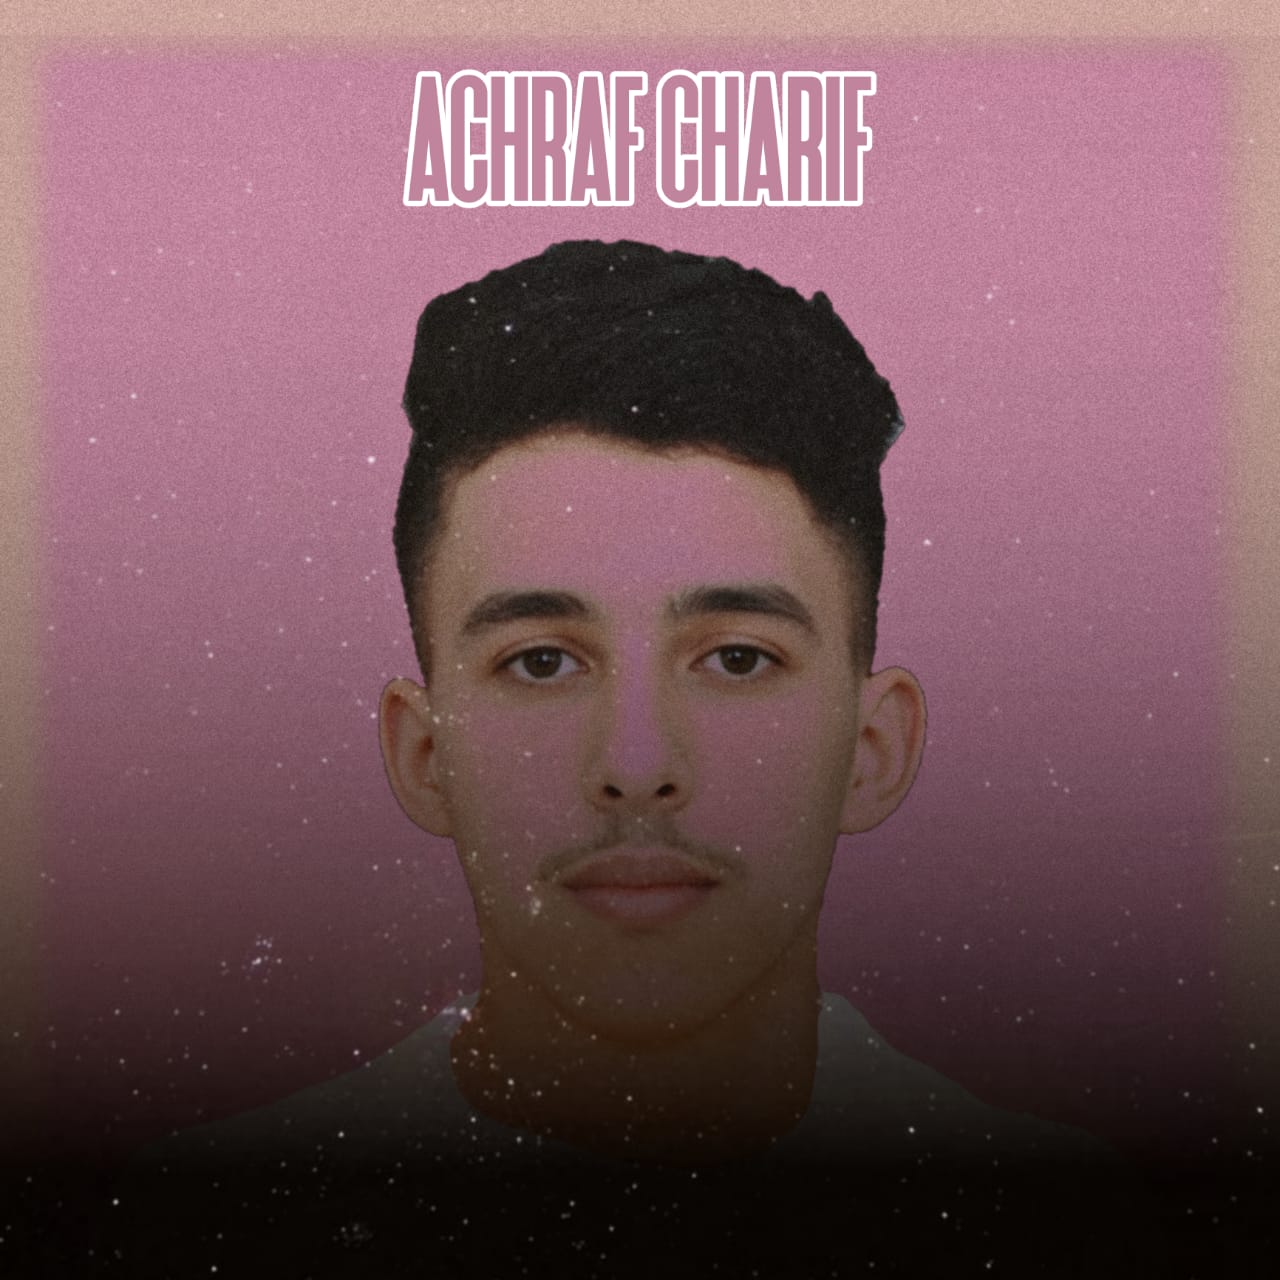 ACHRAF CHARIF: THE JOURNEY OF THE SUCCESSFUL MOROCCAN SINGER AND FOUNDER OF "ACHRAF MK STUDIO". 10